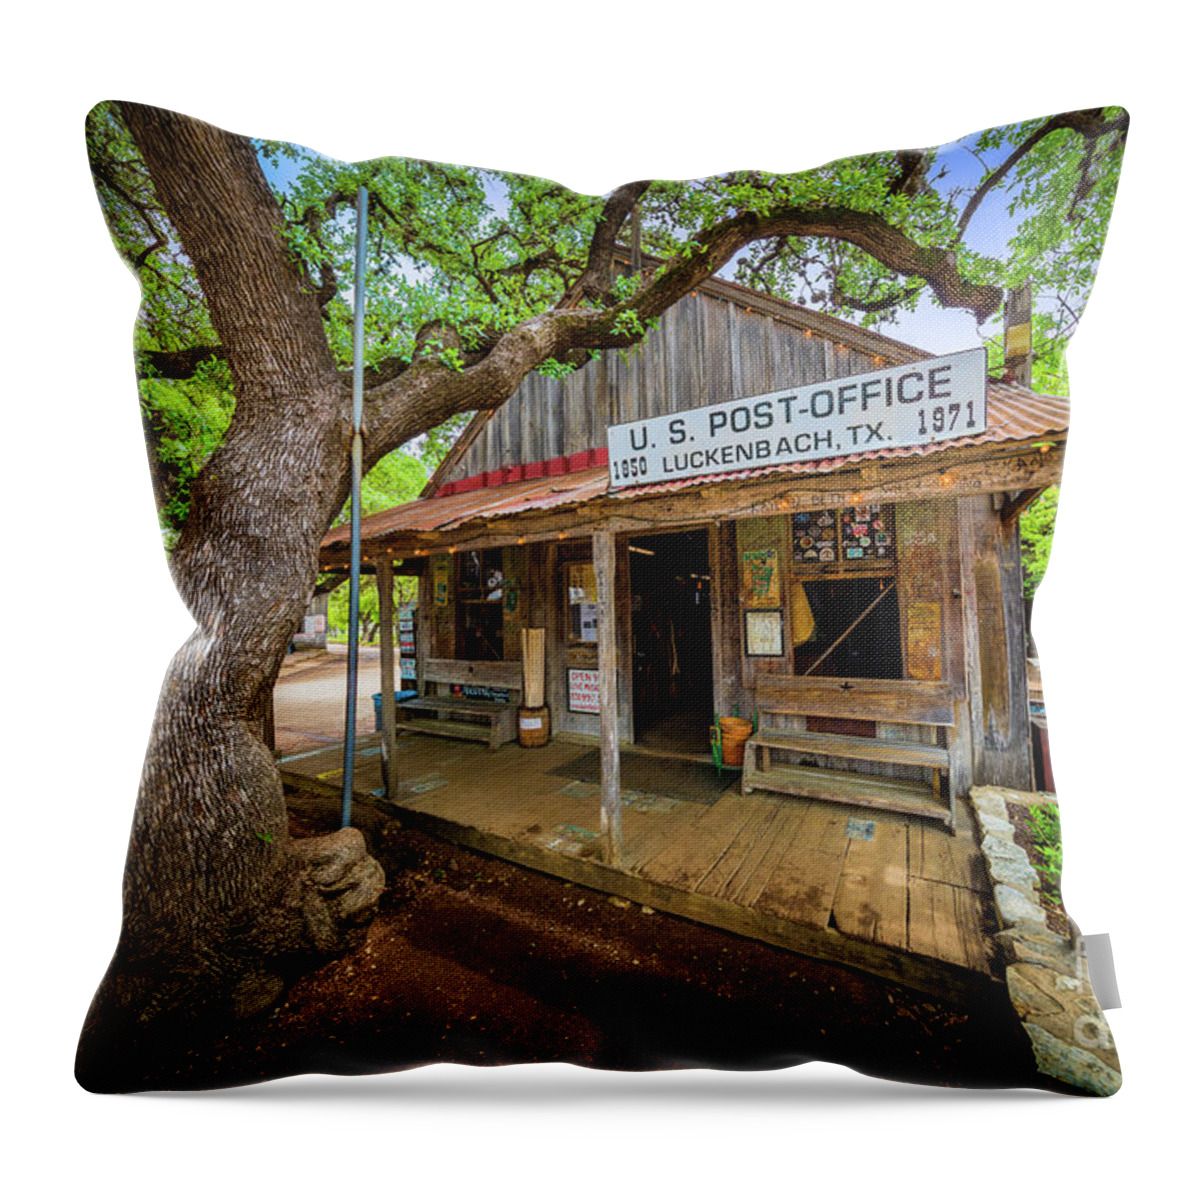 America Throw Pillow featuring the photograph Luckenbach Town by Inge Johnsson